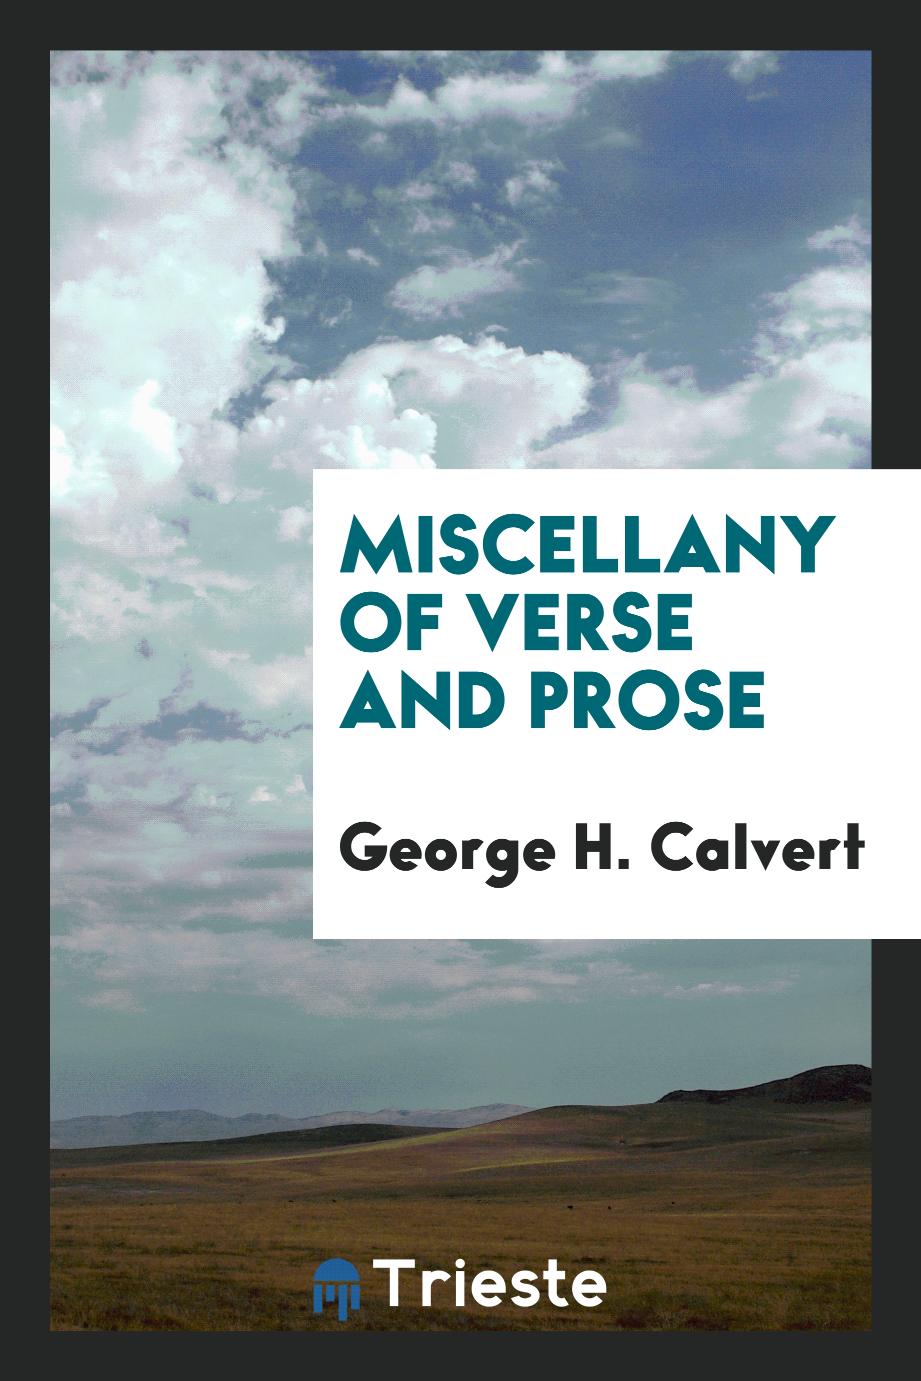 Miscellany of Verse and Prose